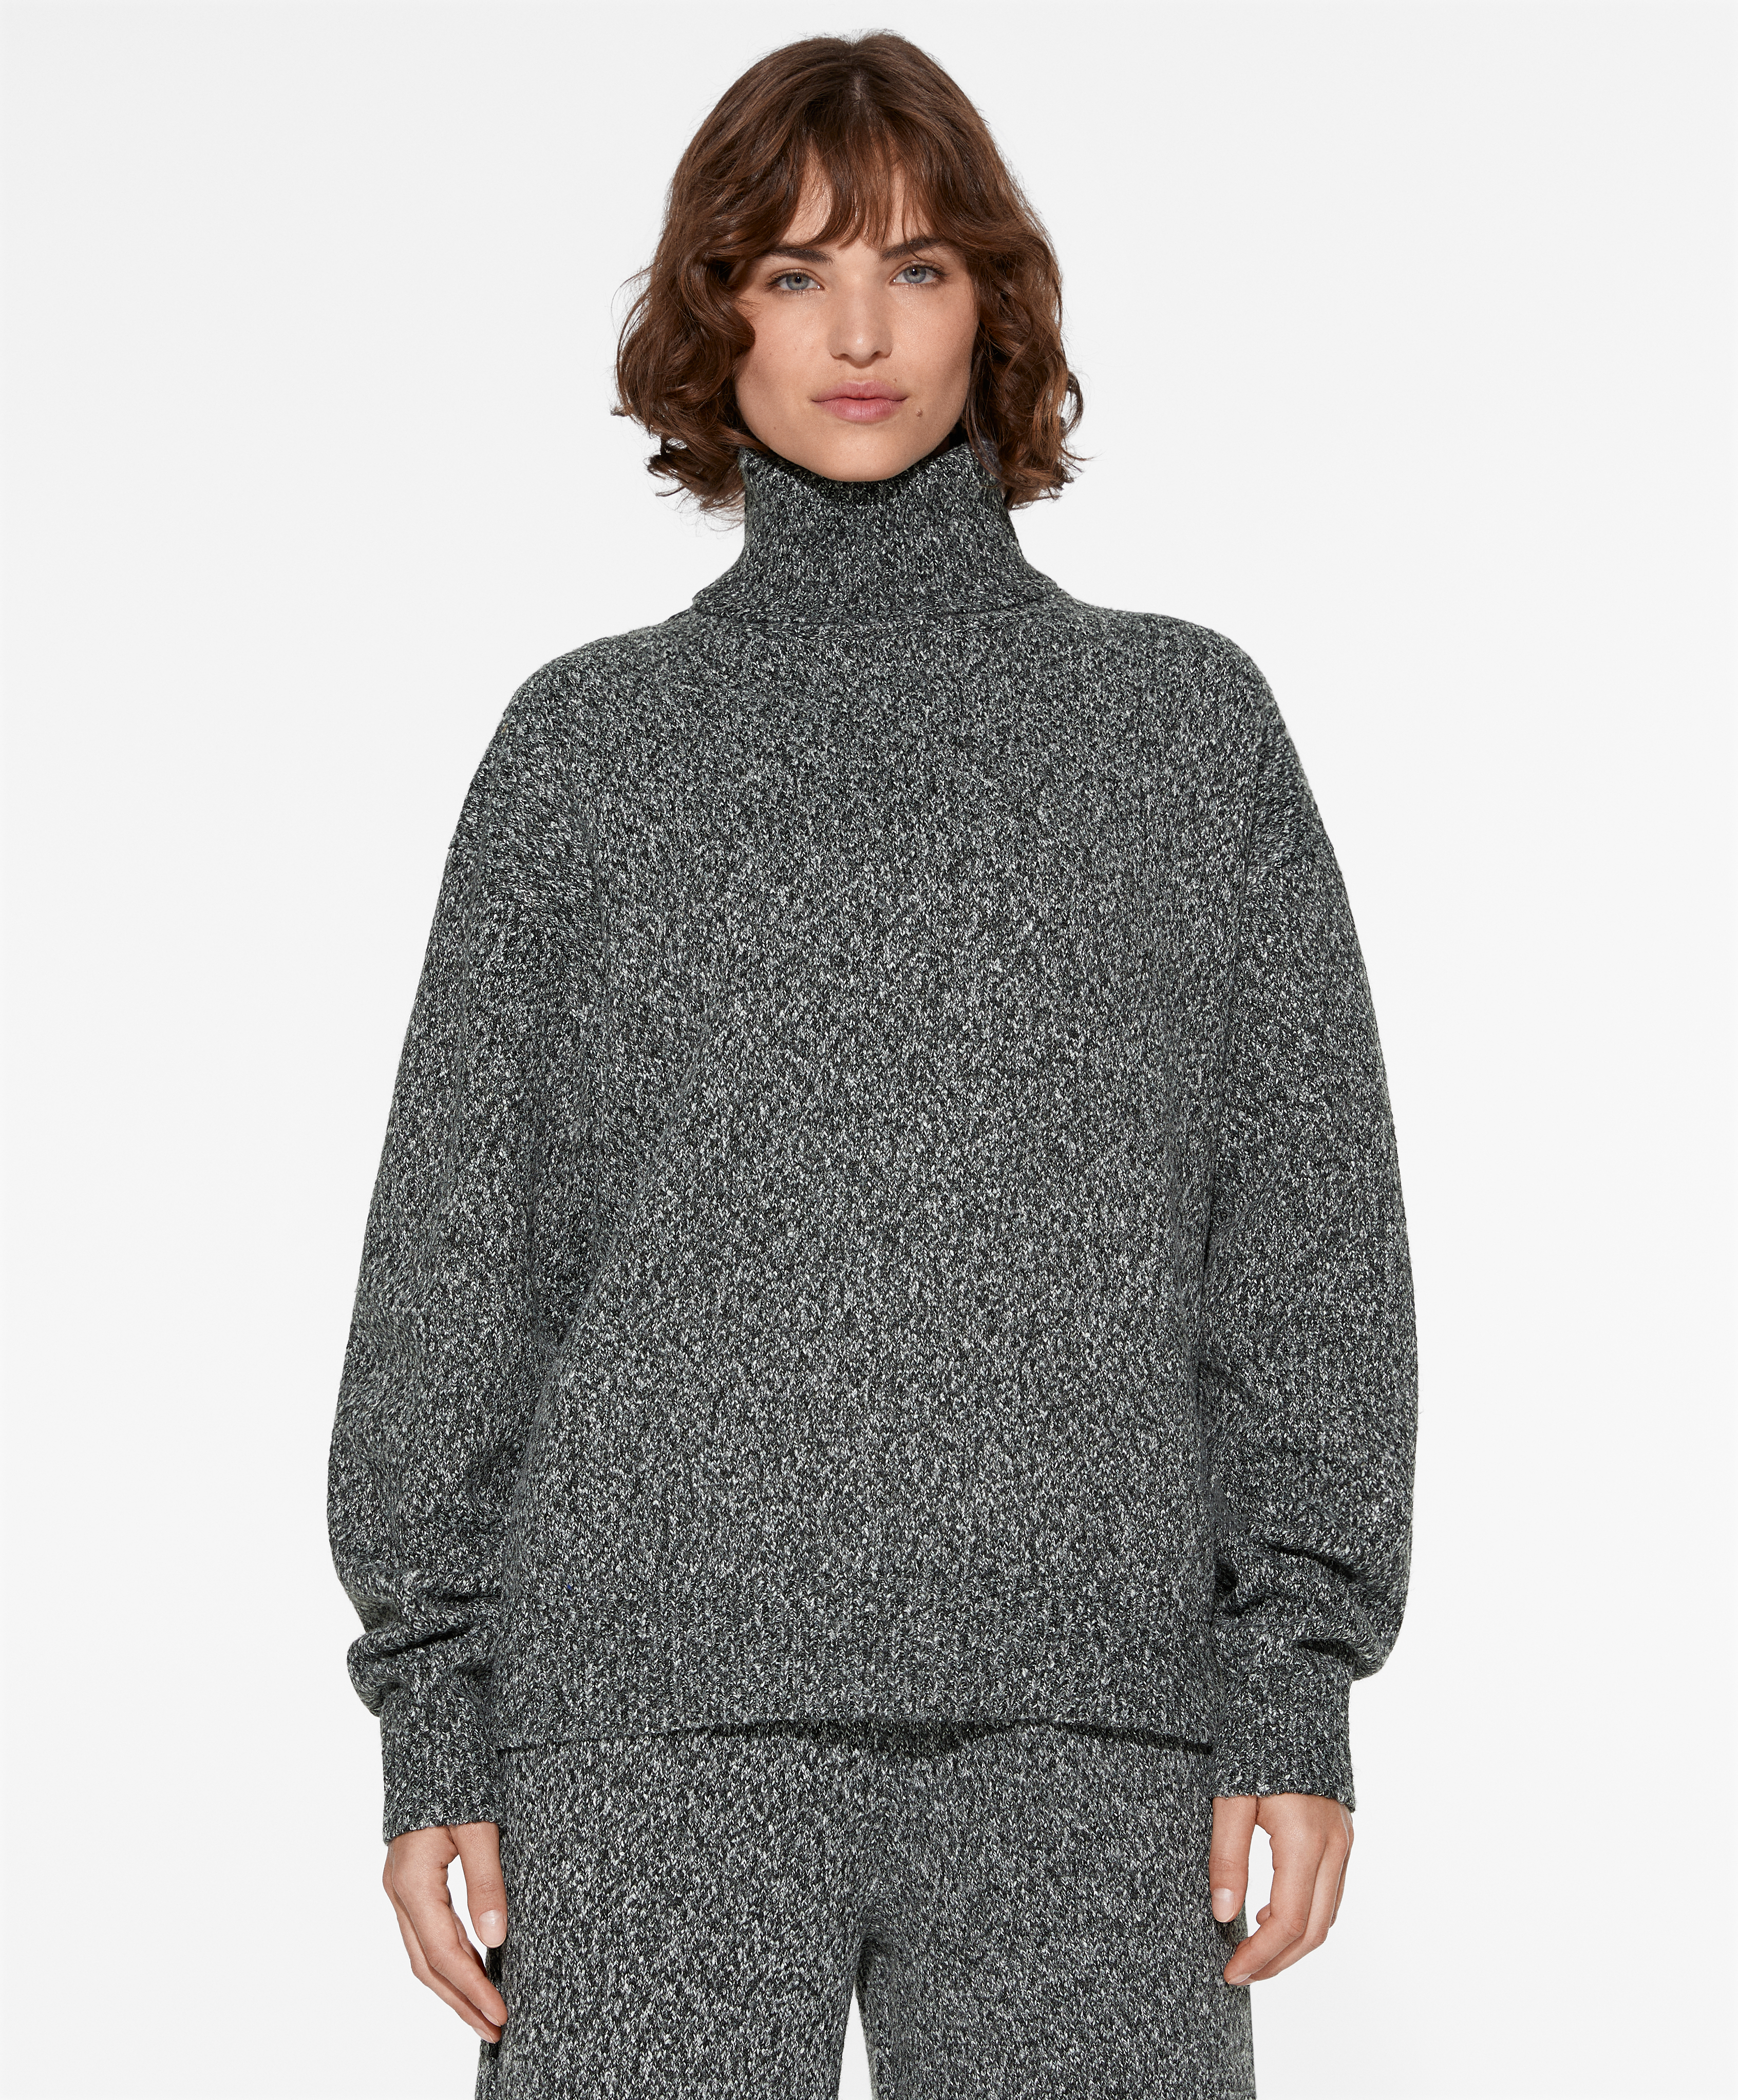 Twisted-knit high-neck jumper